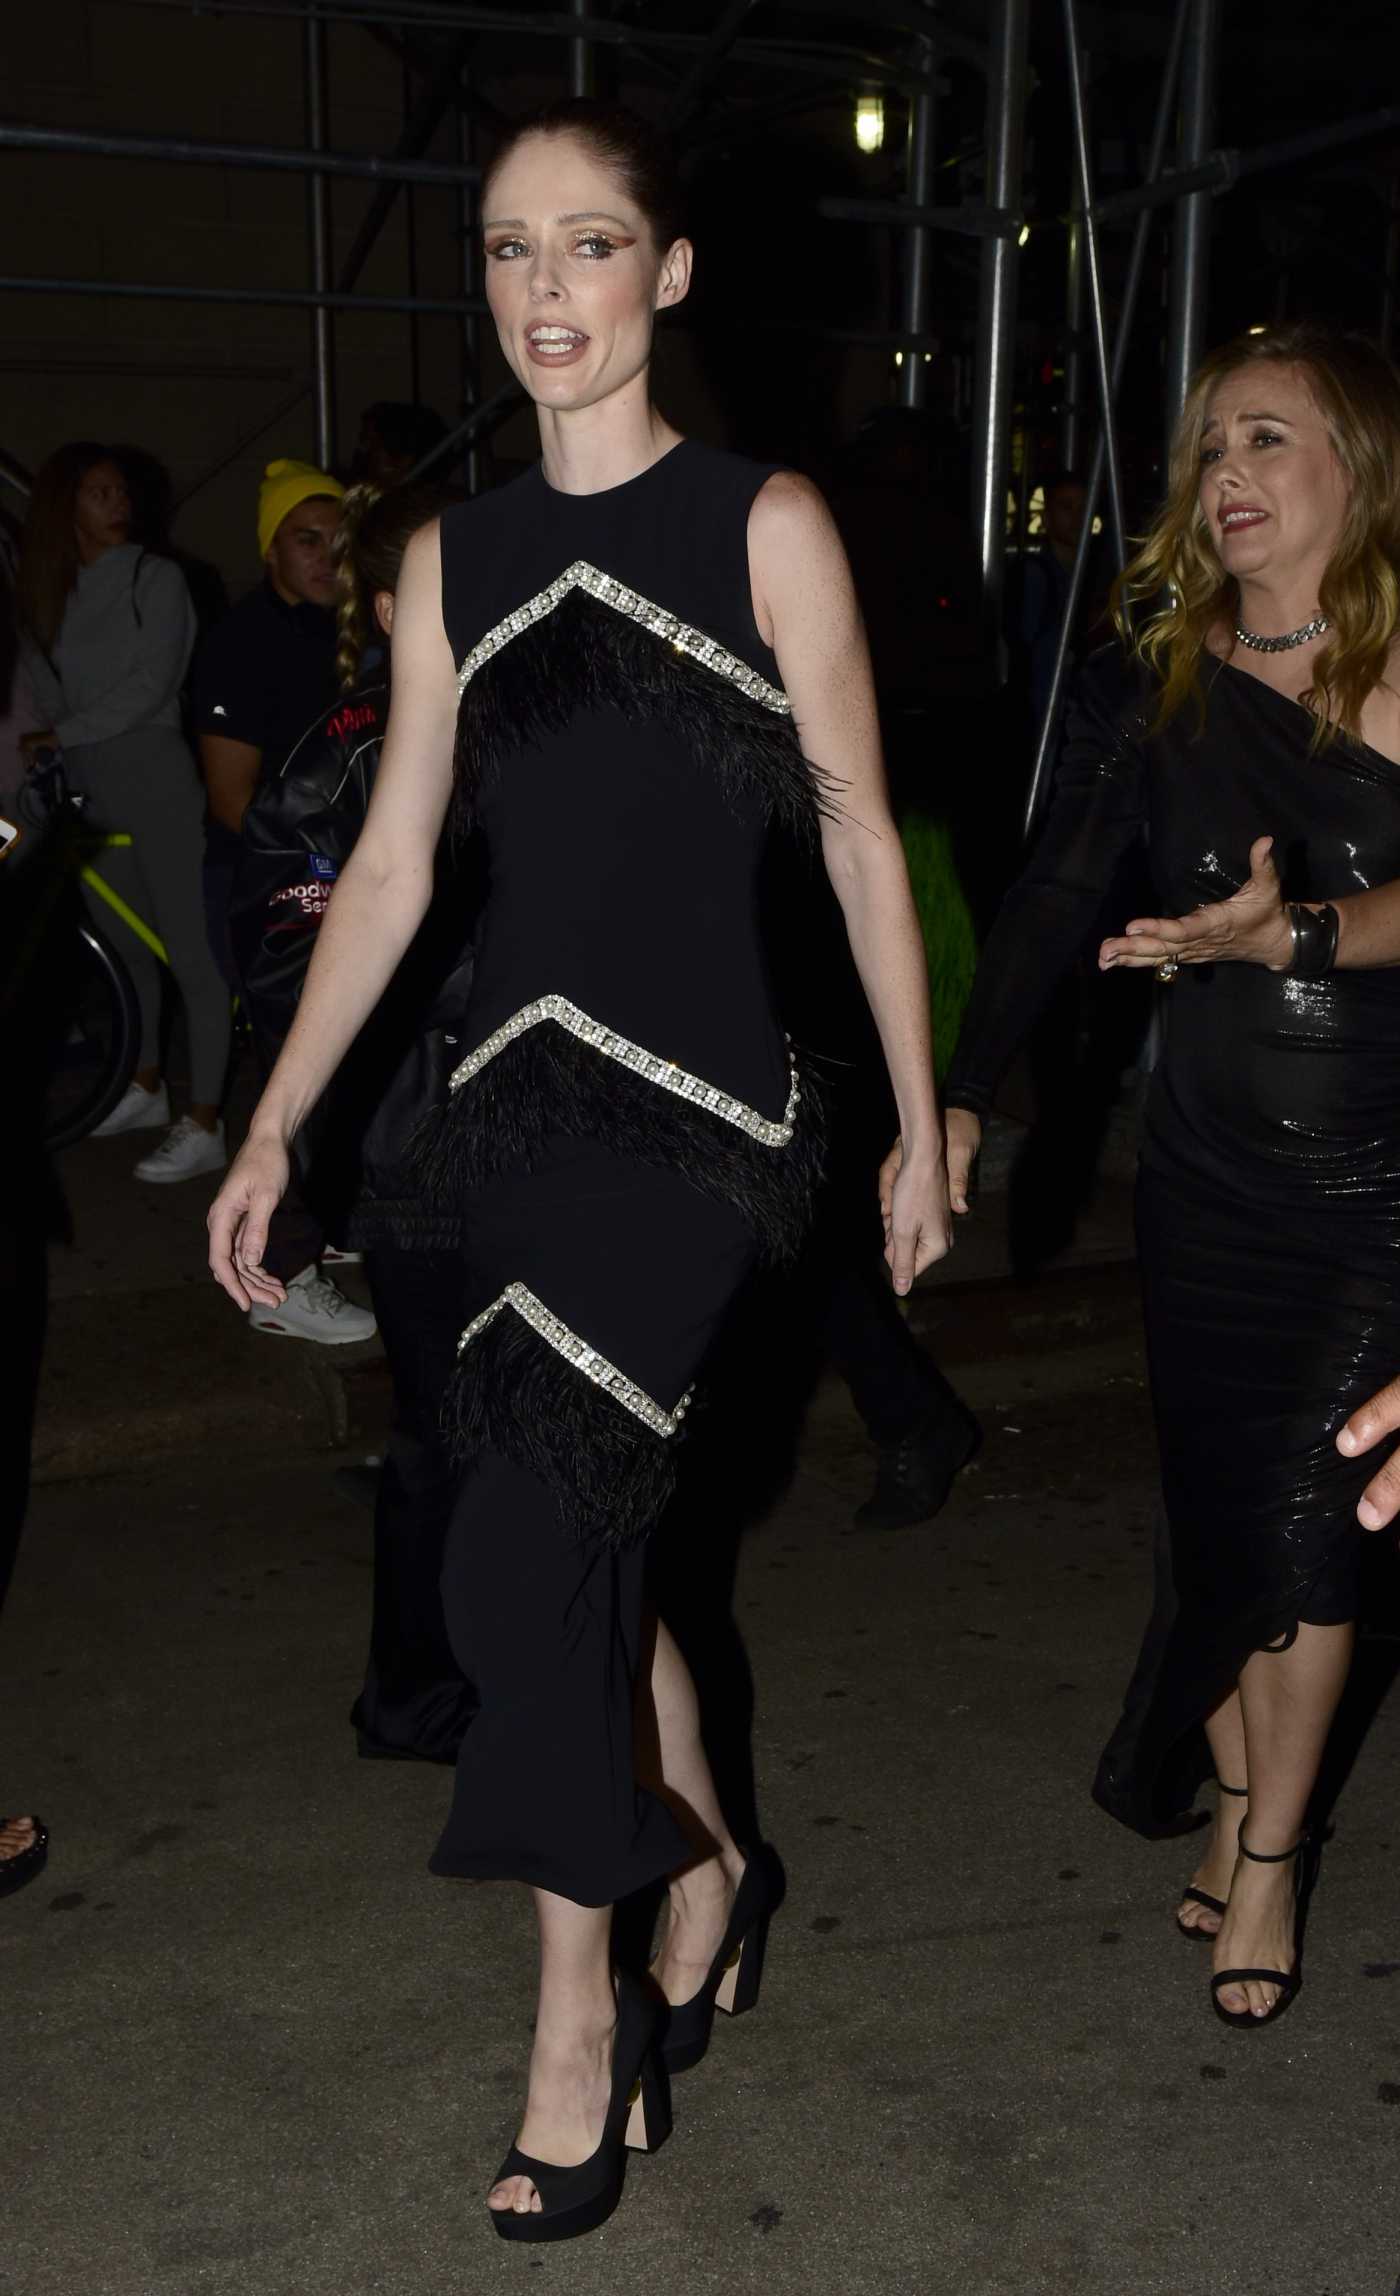 Coco Rocha in a Black Dress Leaves Christian Siriano Fashion Show During NYFW at Gotham Hall in Manhattan in NYC 09/07/2021